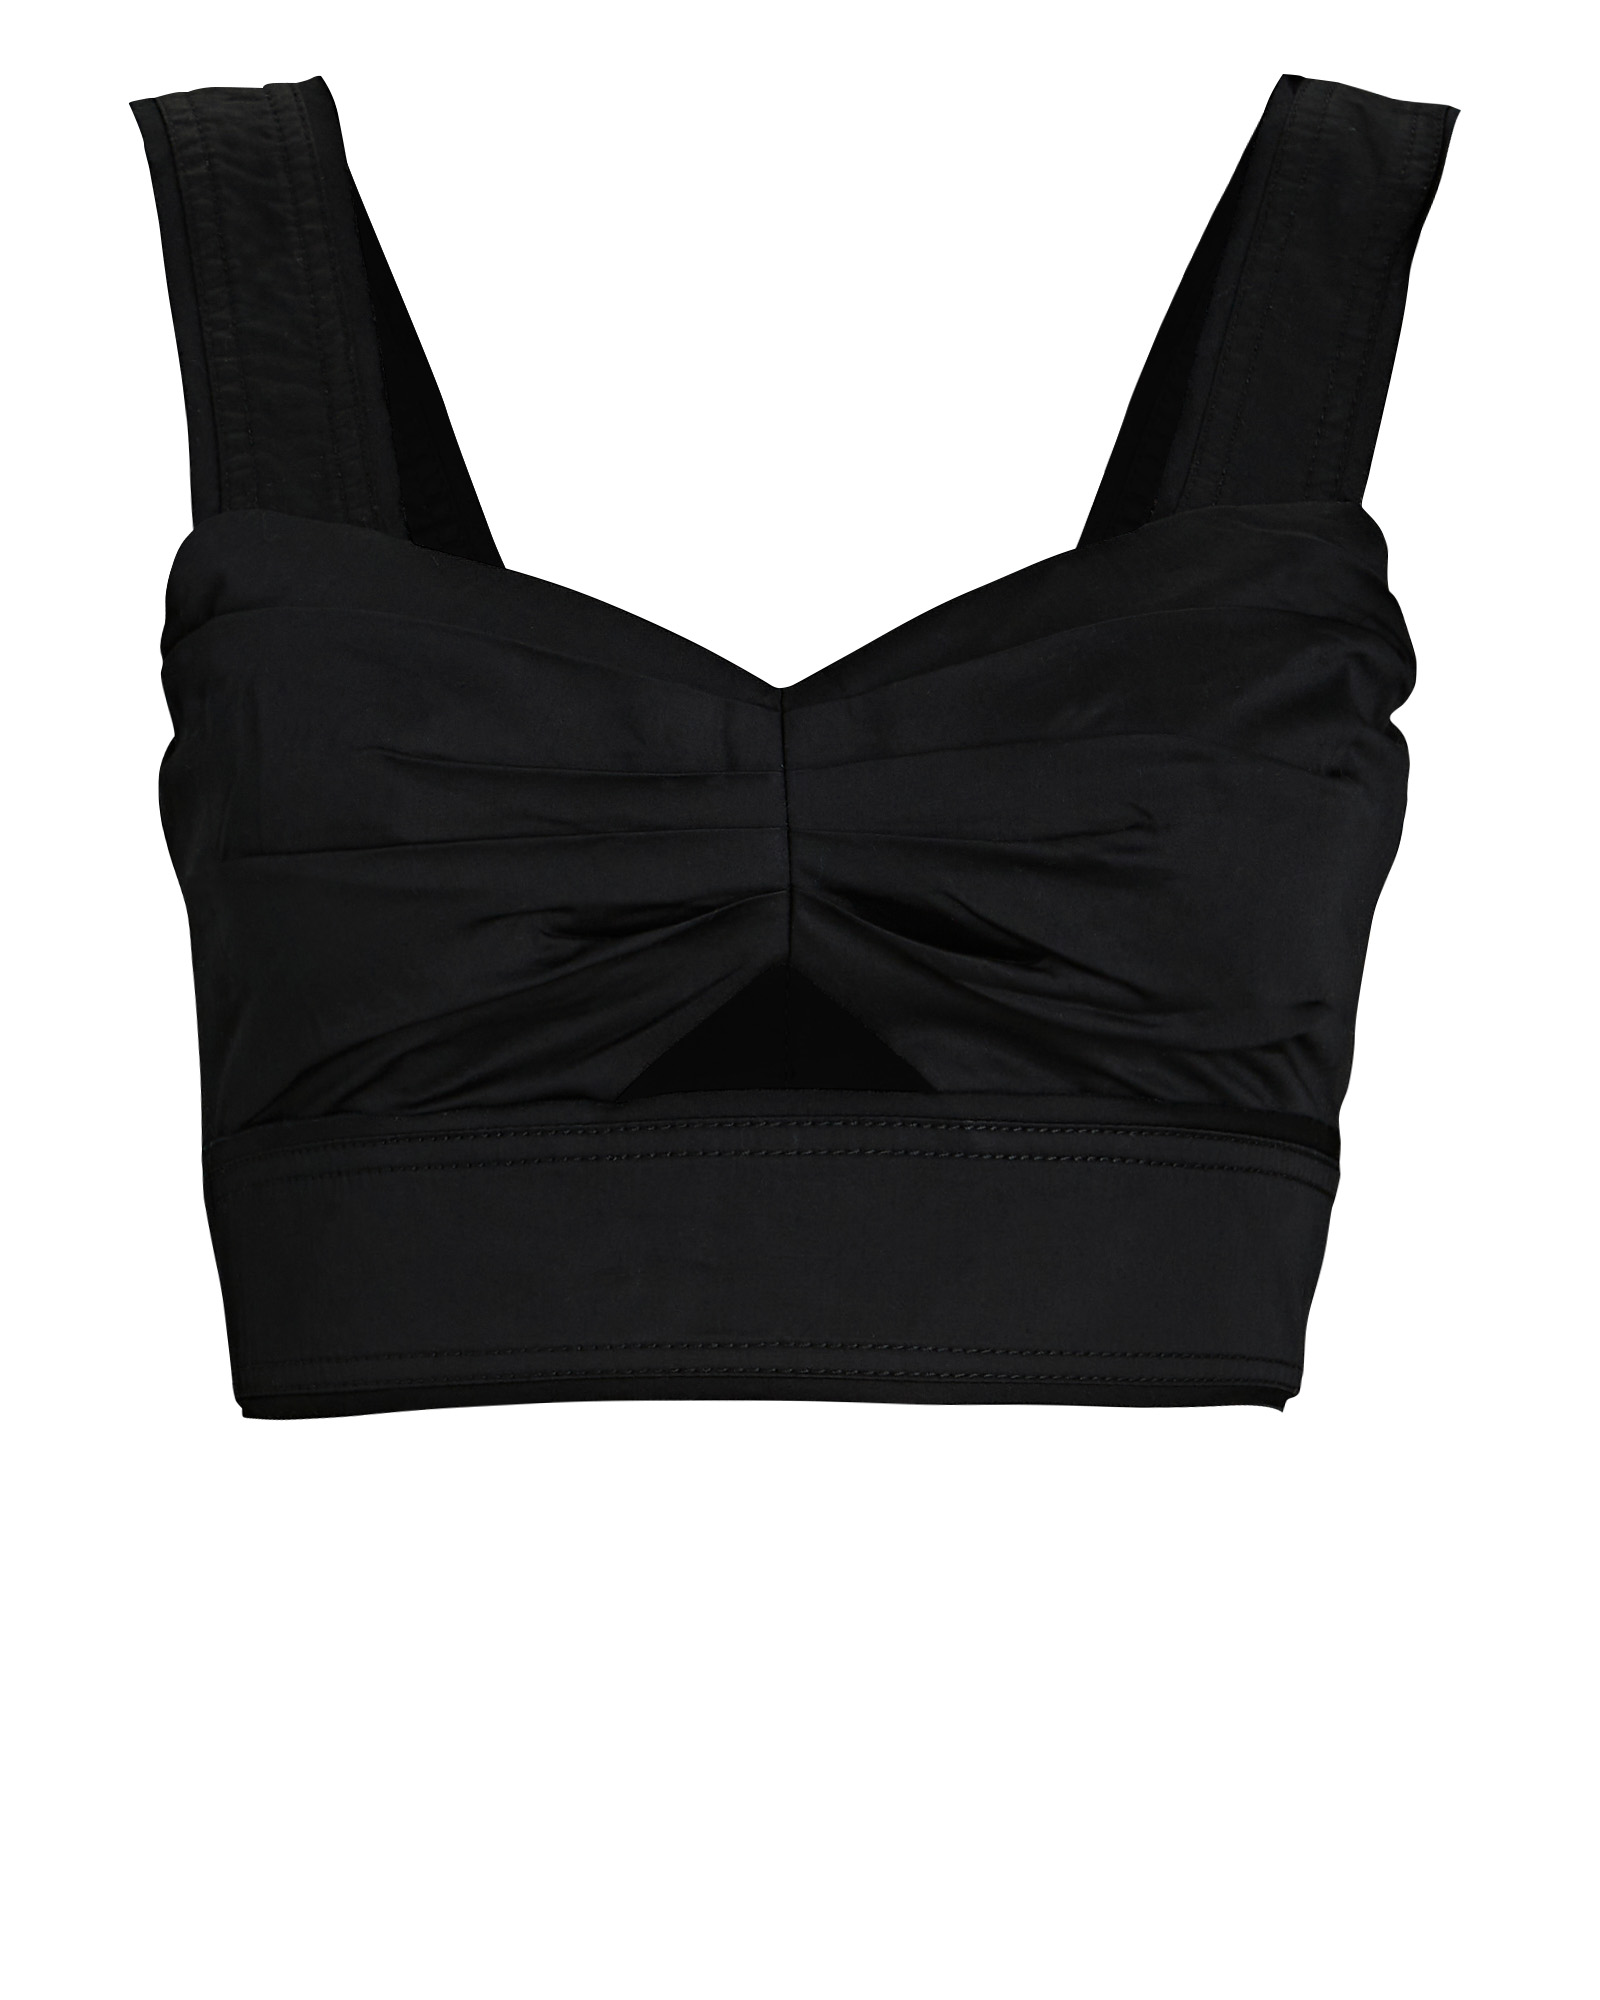 Recurrence Bustier Top